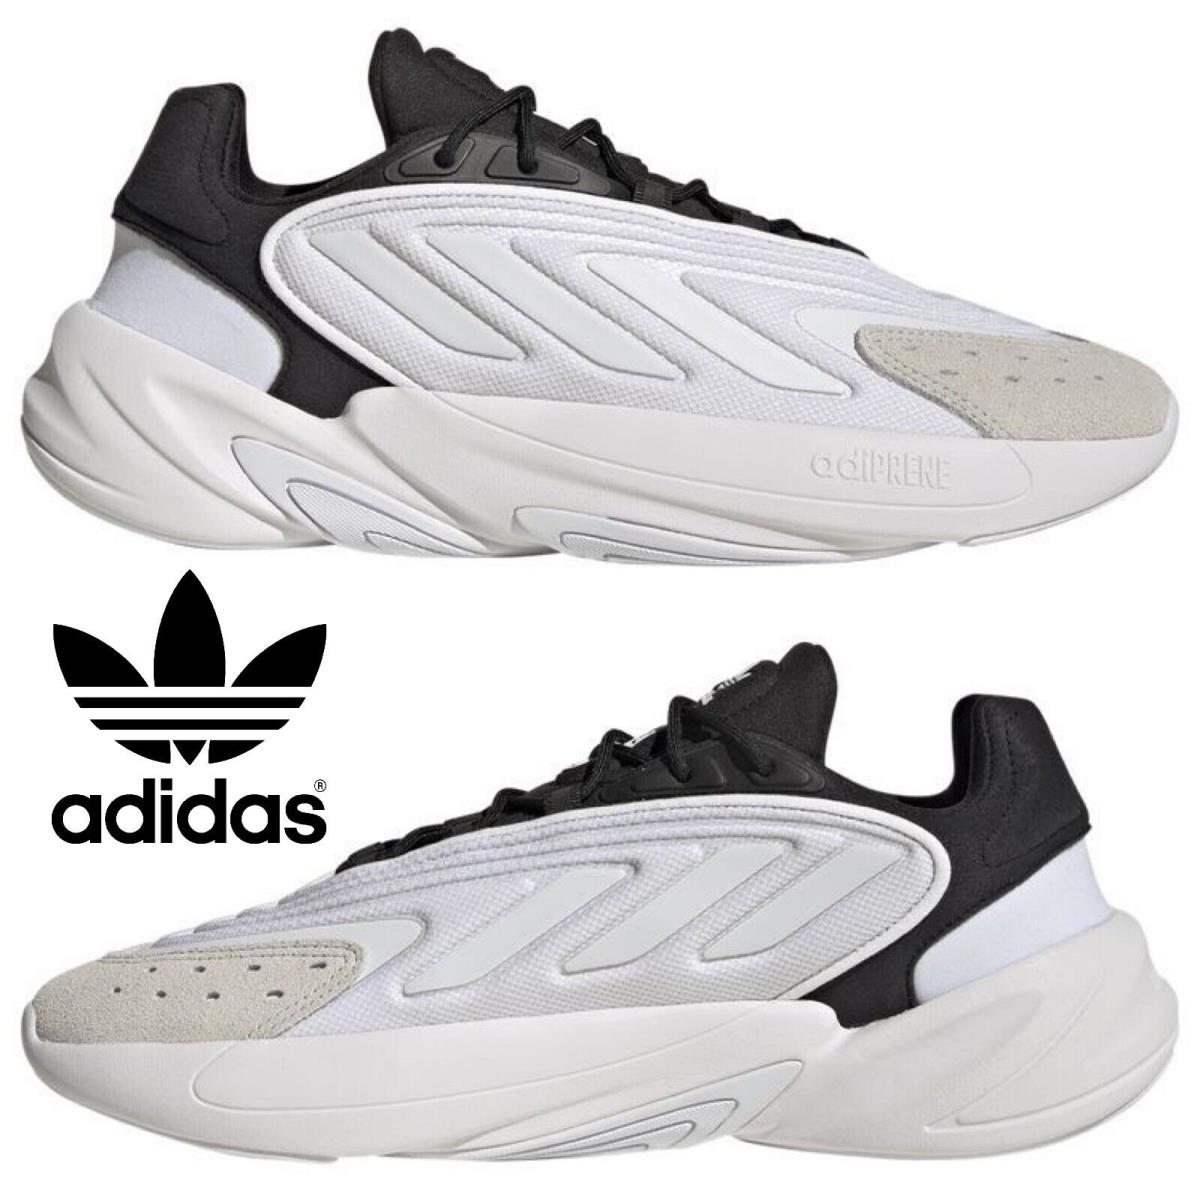 Adidas Originals Ozelia Men`s Sneakers Comfort Sport Running Shoes Bold Chunky - White, Manufacturer: White/Black